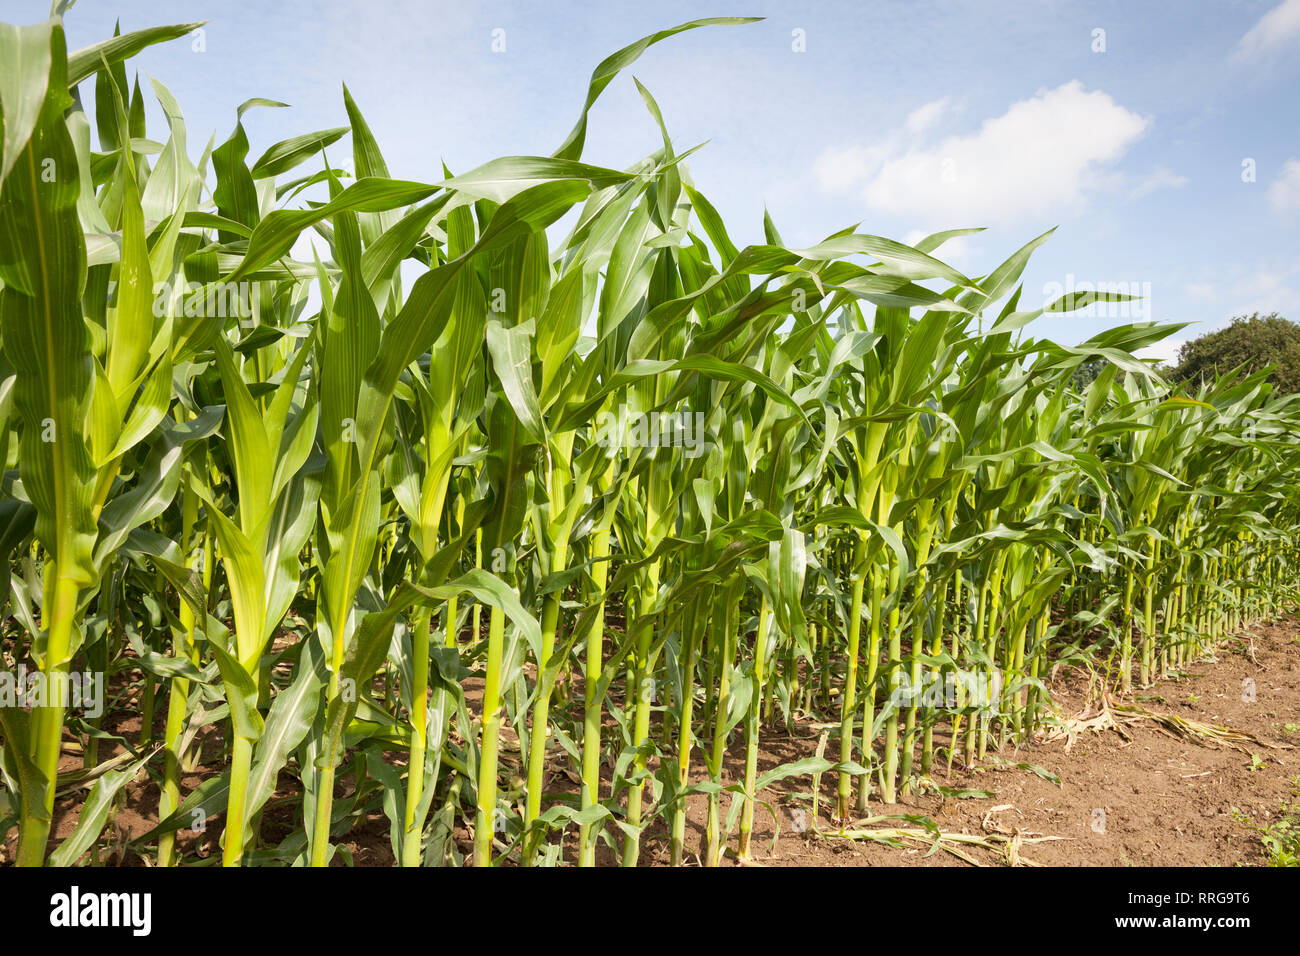 La botanica, mais (Zea mays), campo, Germania, Additional-Rights-Clearance-Info-Not-Available Foto Stock